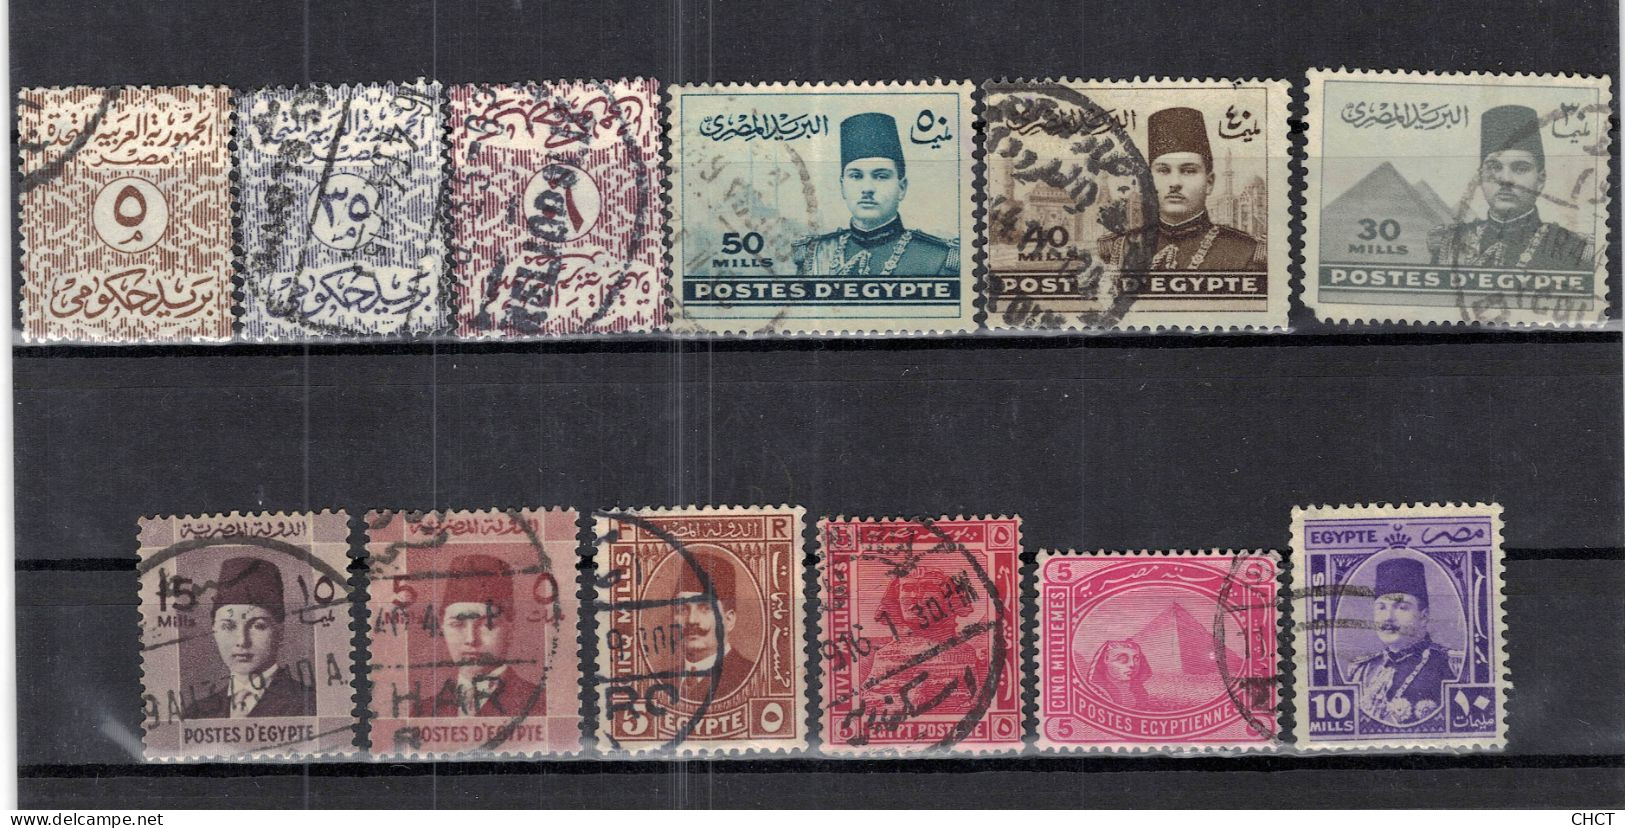 CHCT84 - Lot Of 12 Old Used Stamps Mix, Egypt - Gebruikt